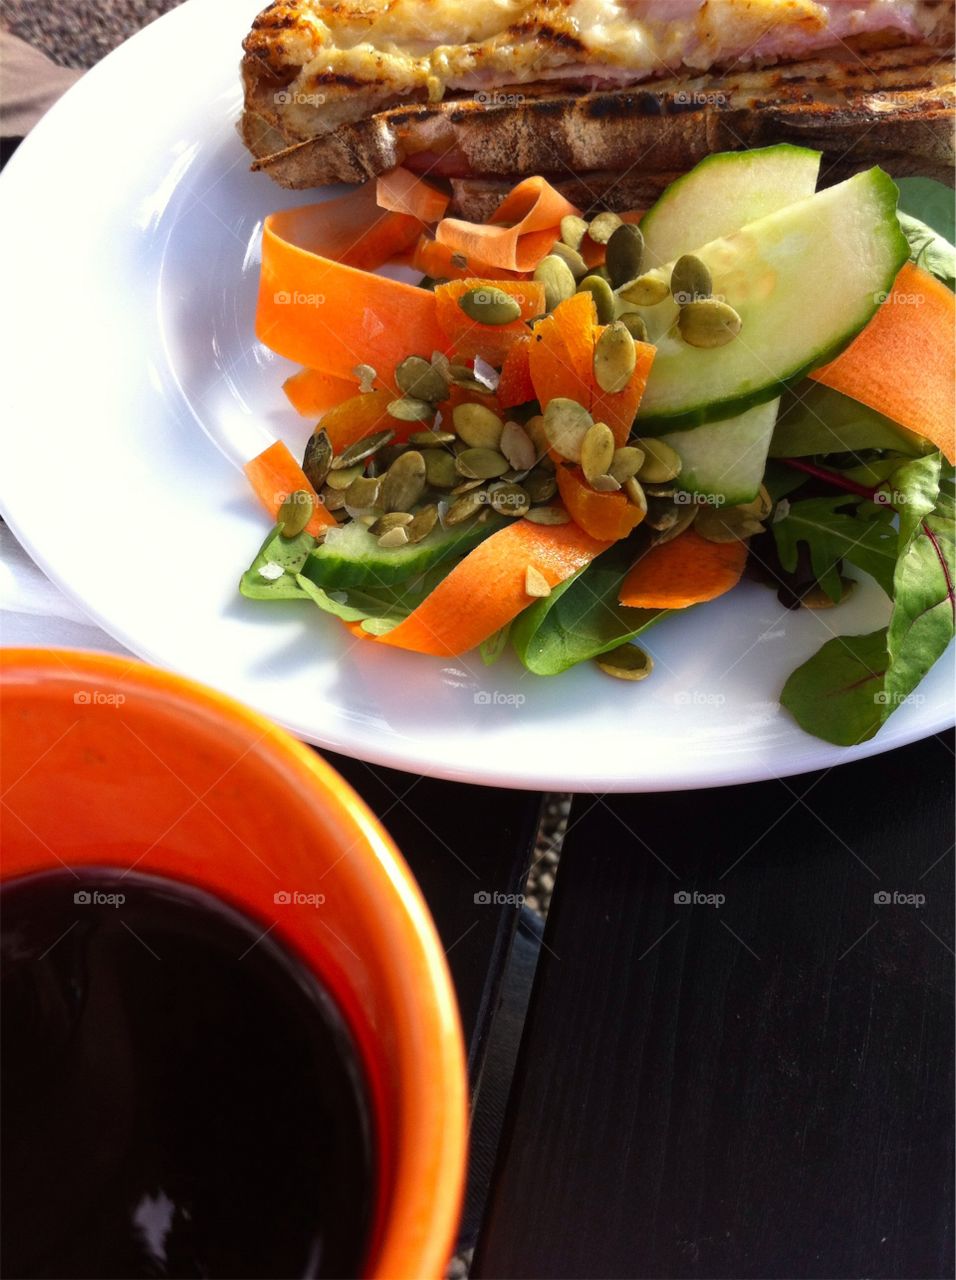 Plate with grilled sandwich and vegetables and a mug with black coffee on a table outdoors.